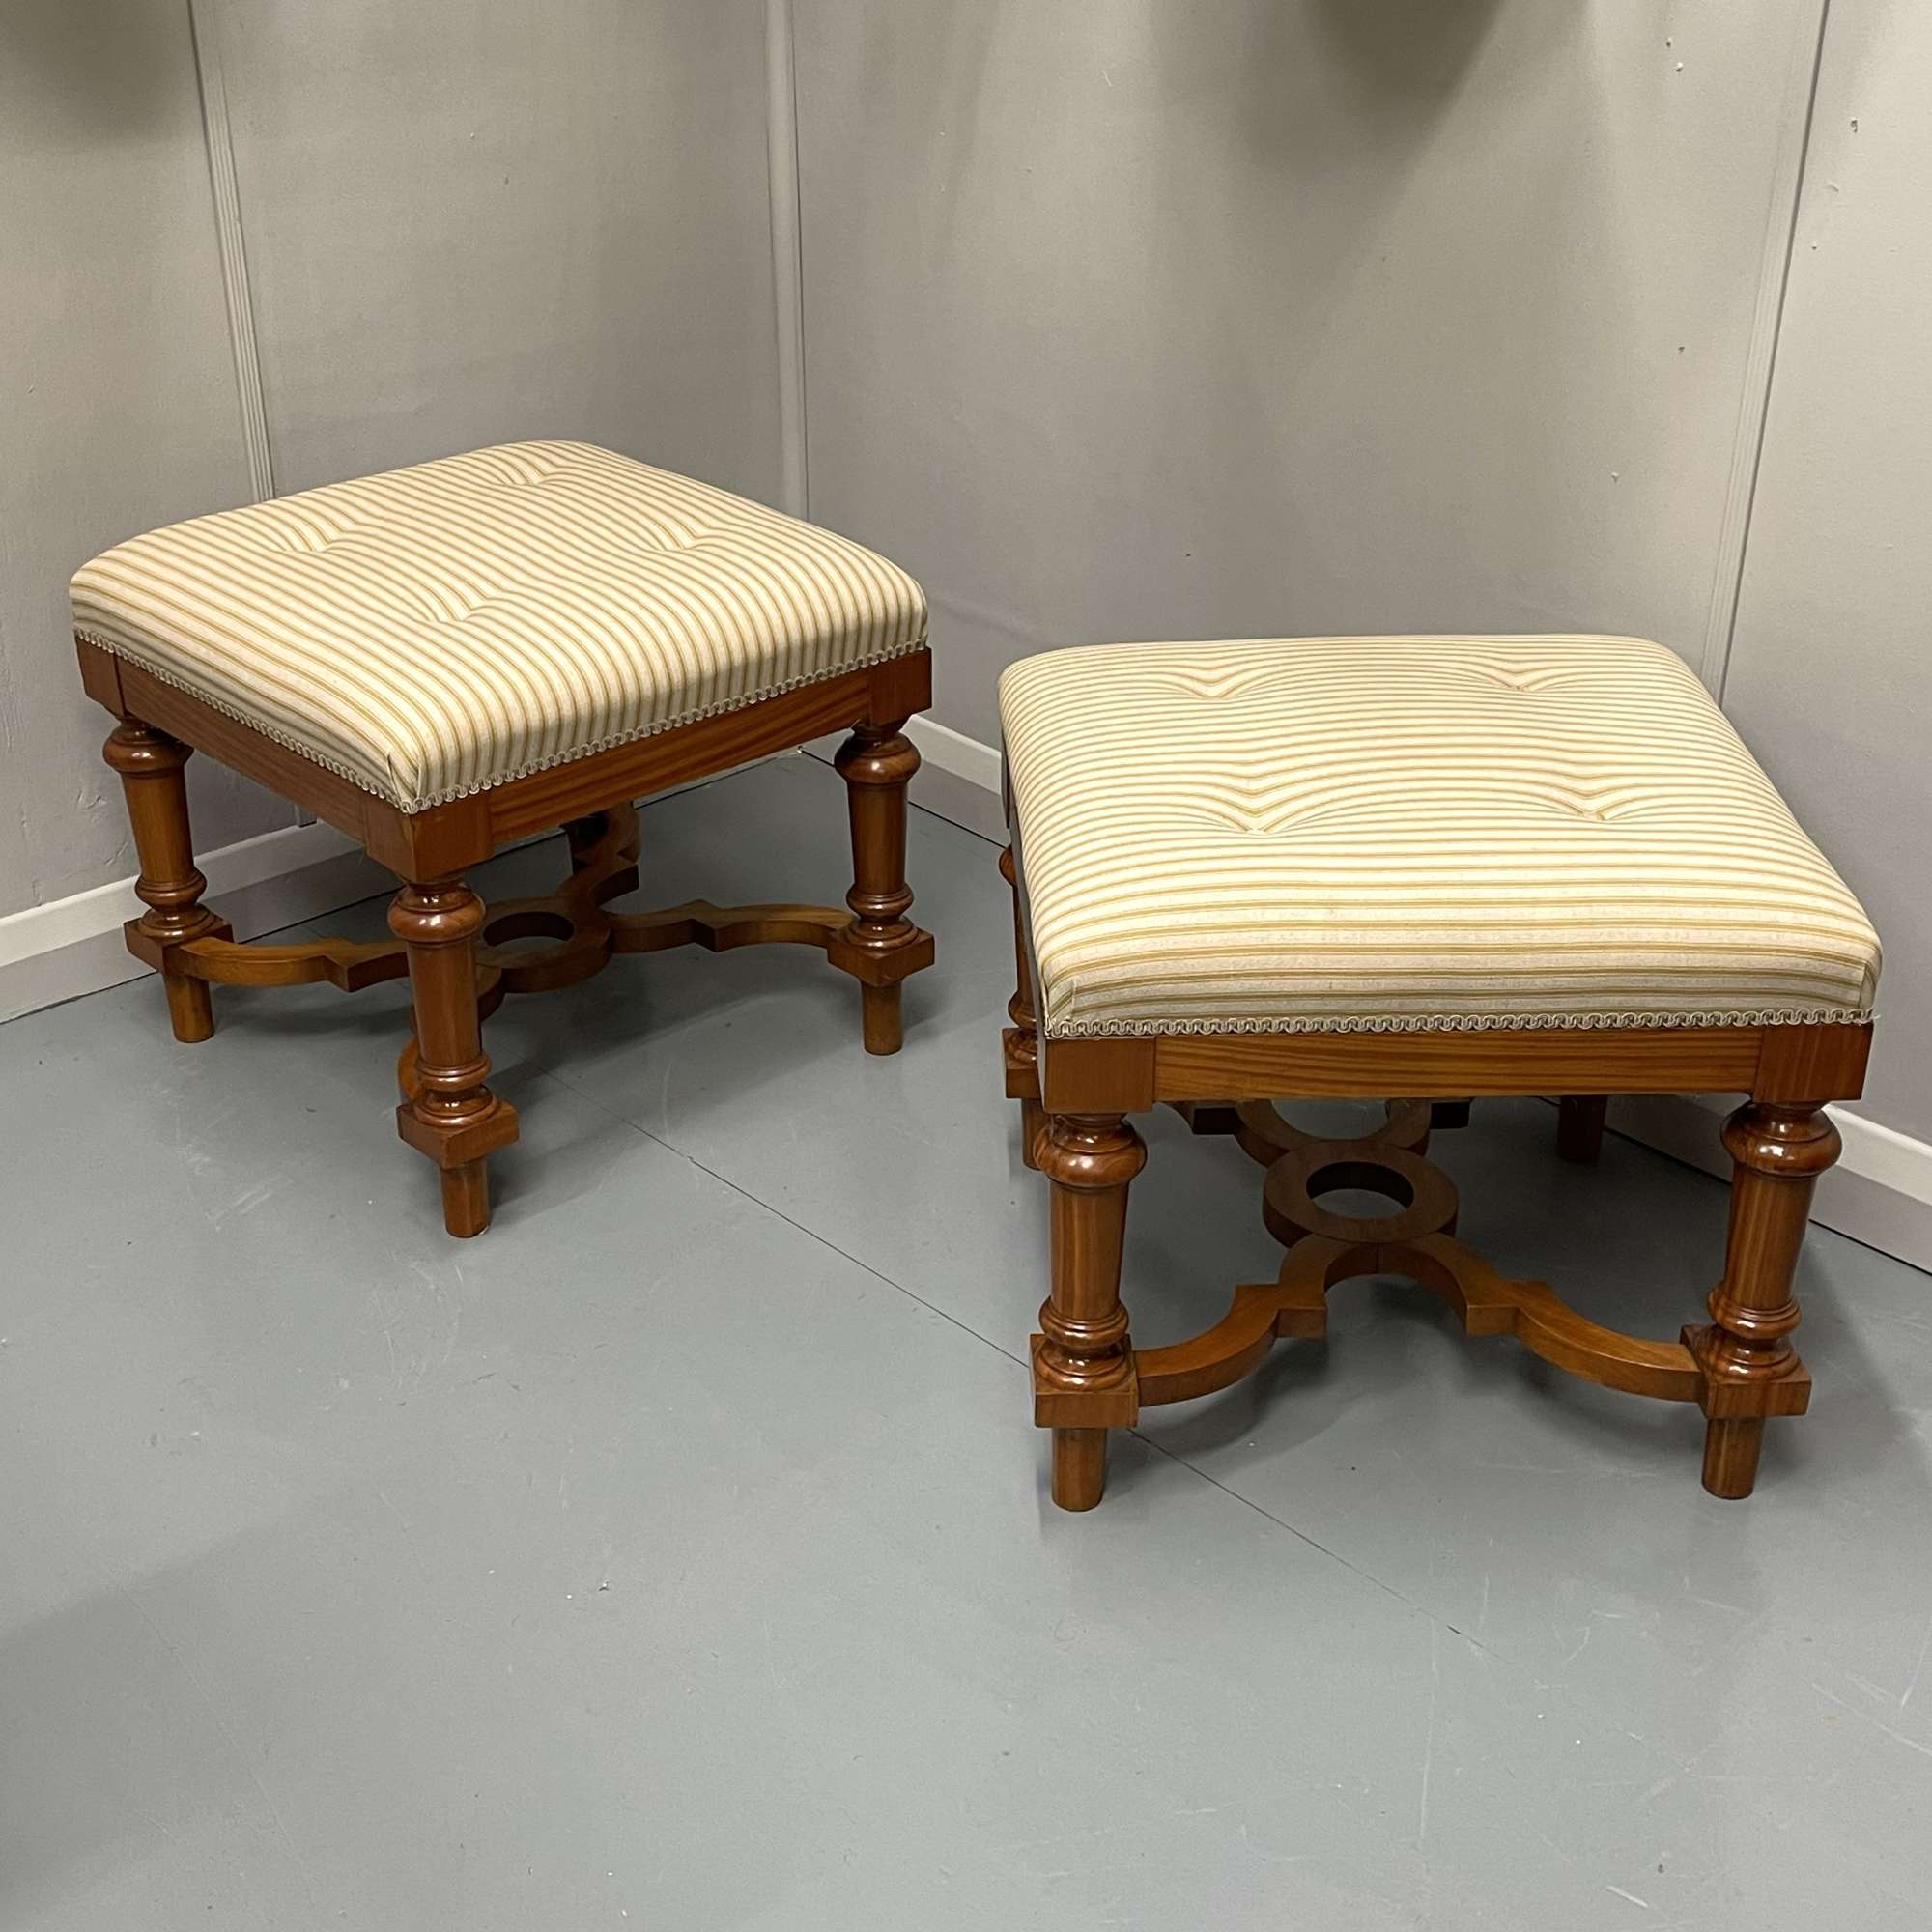 Pair Of French Satinwood Stools With Buttoned Ticking Stripes